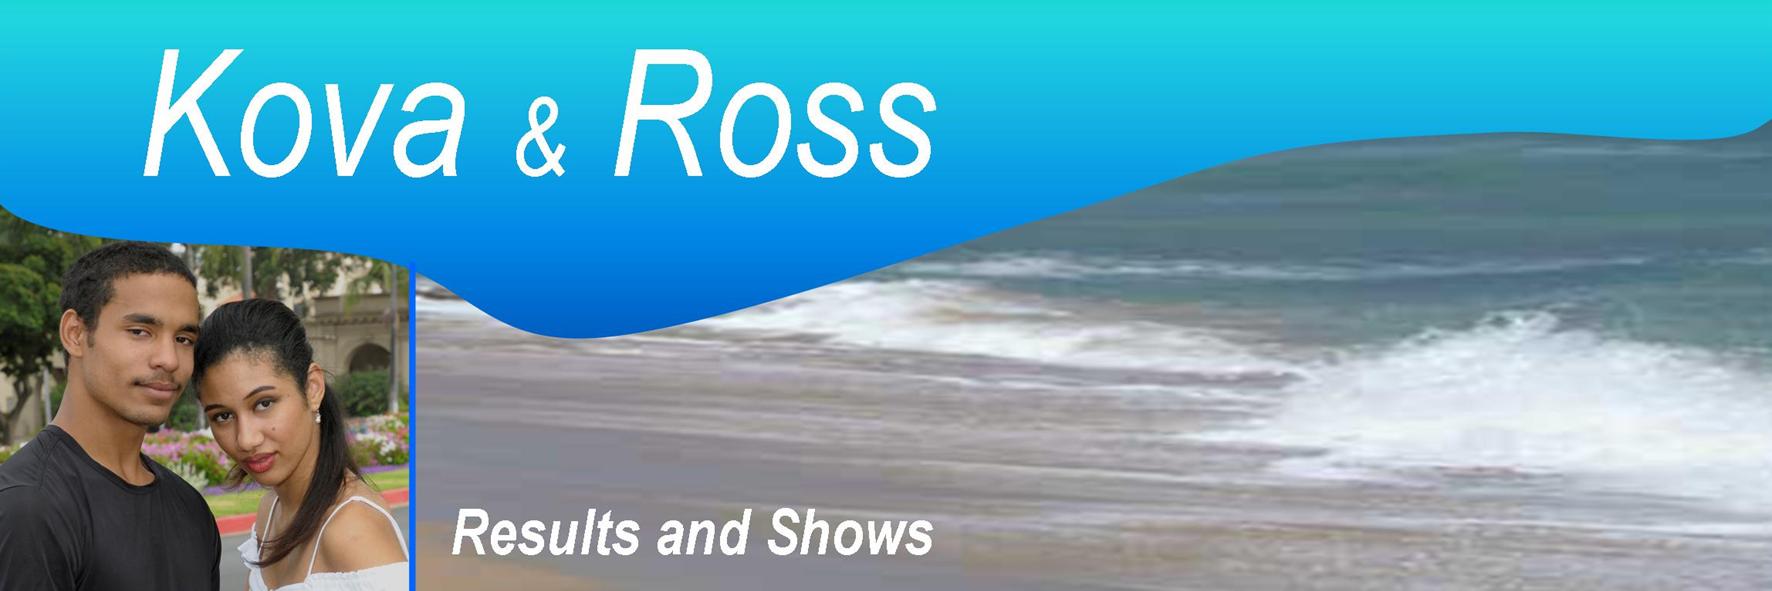 Kova and Ross, Results and Shows